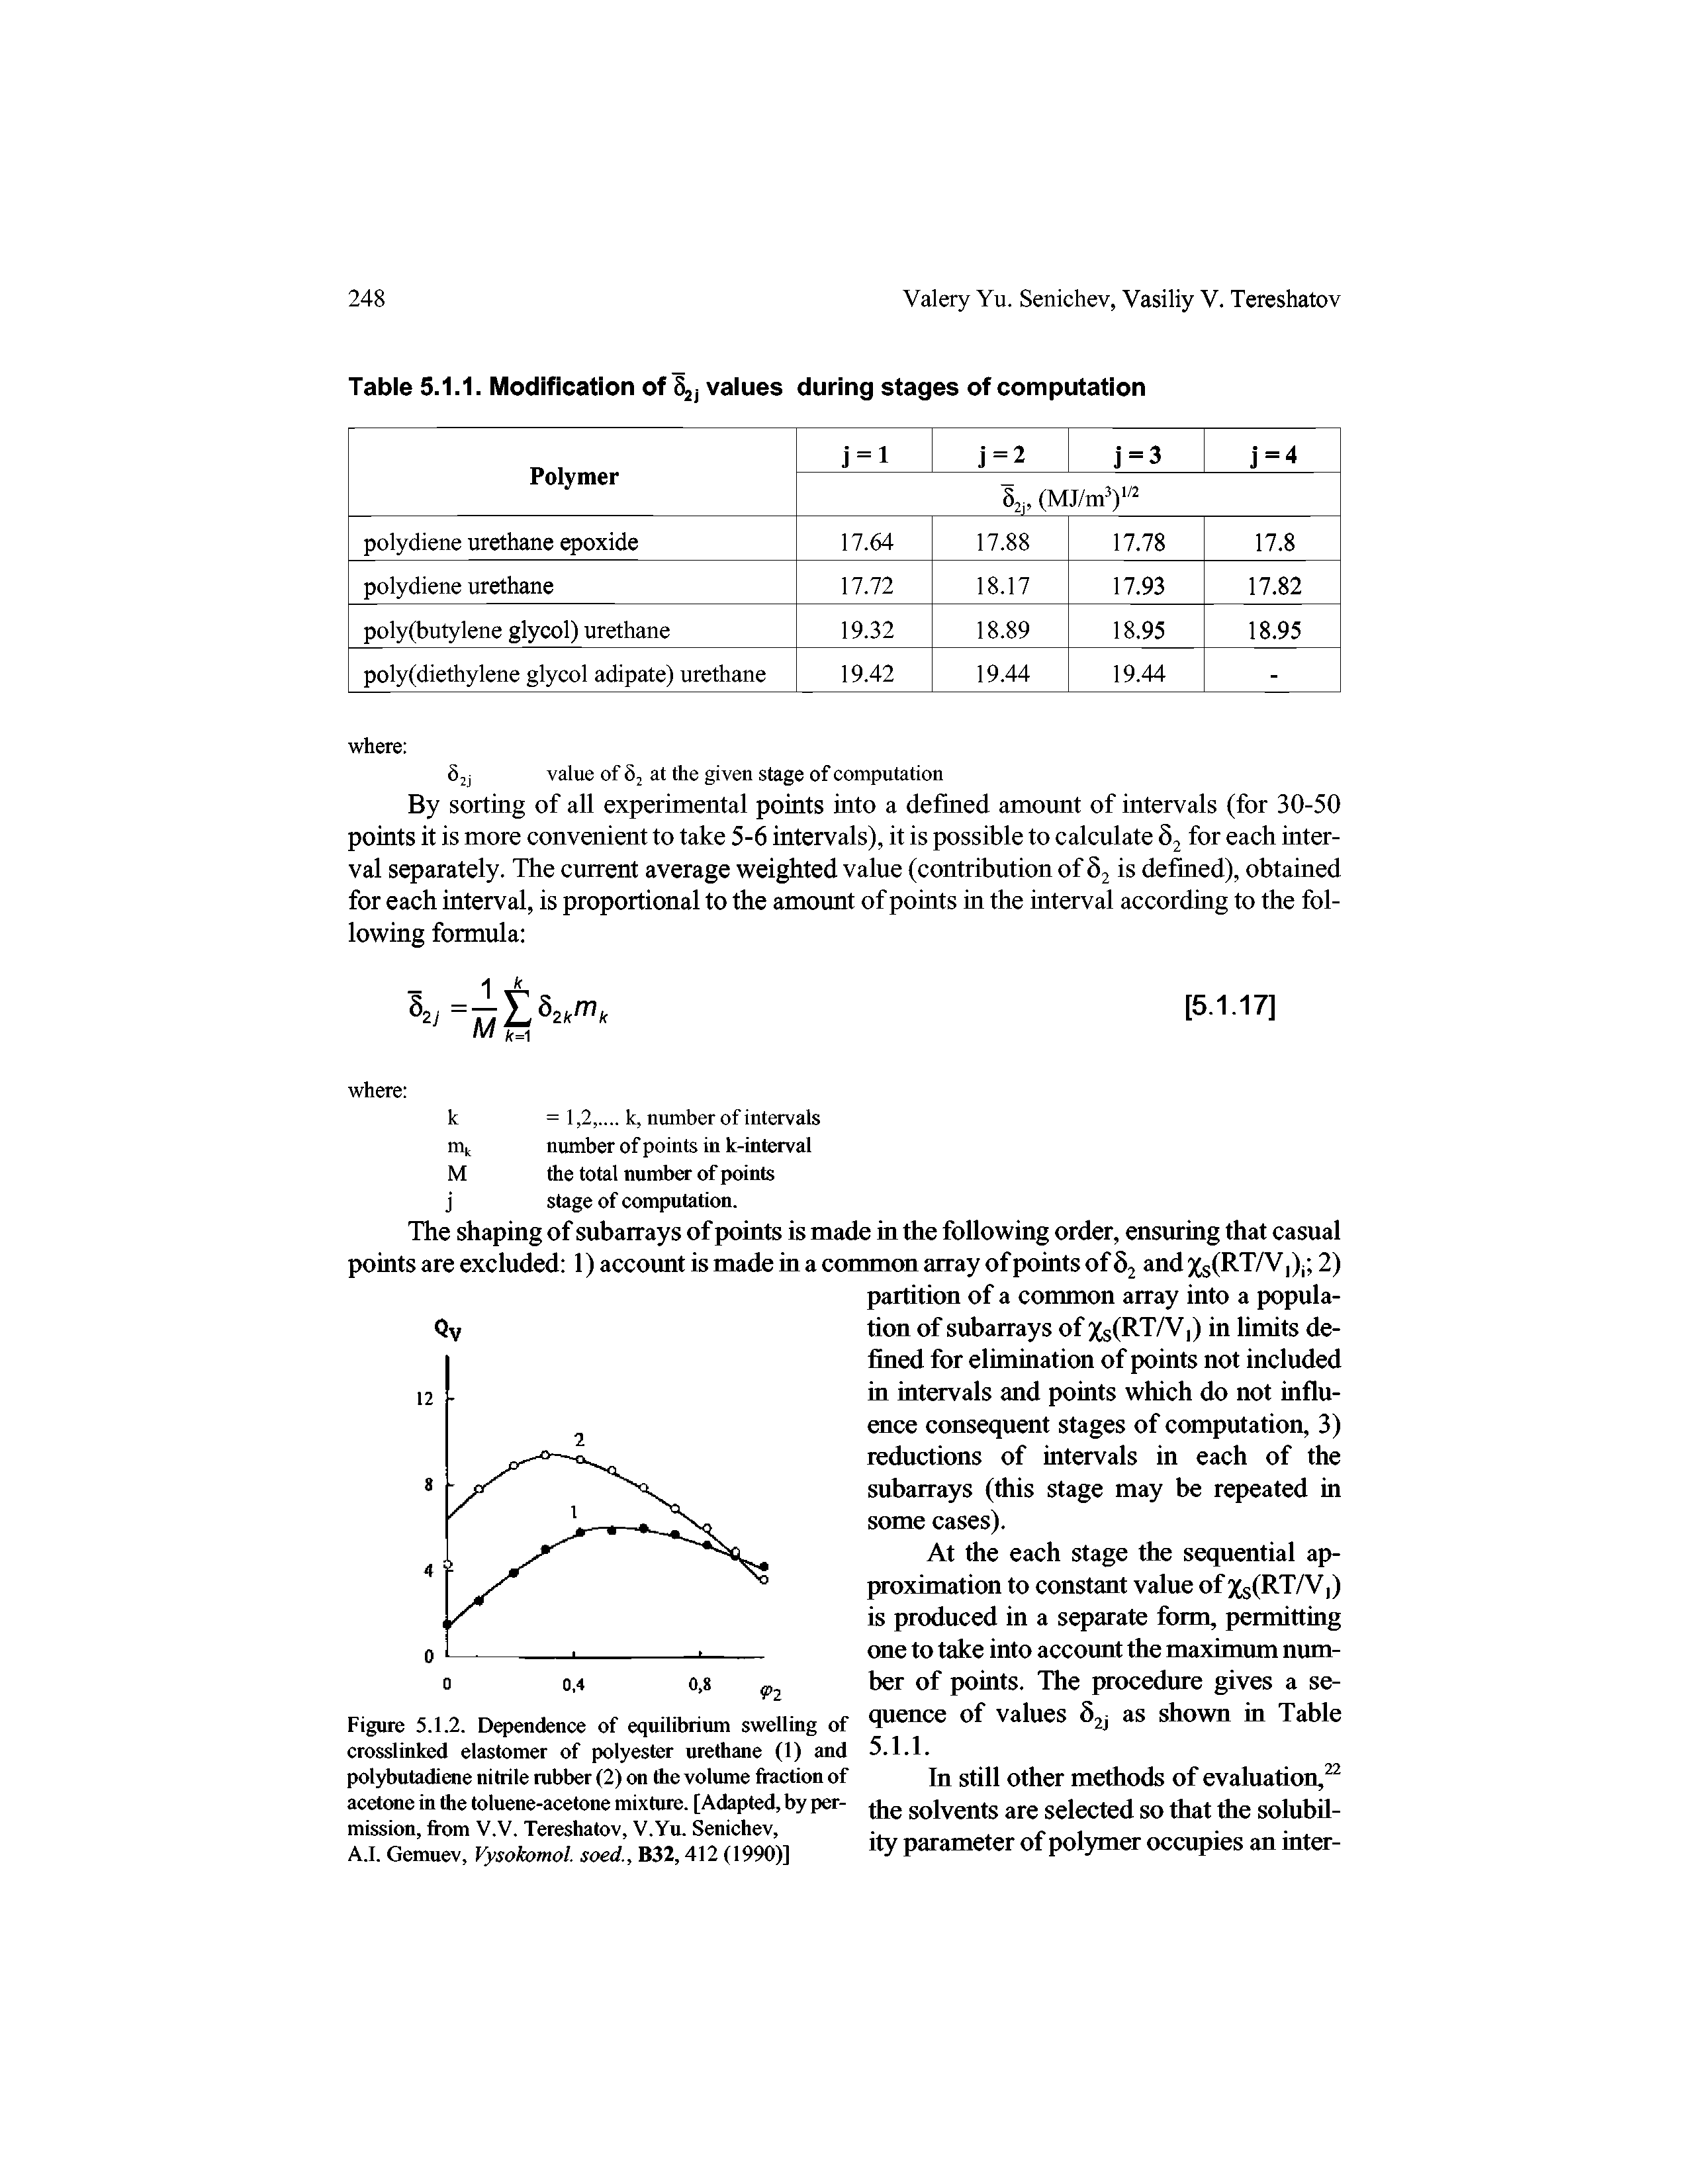 Figure 5.1.2. Dependence of equilibrium swelling of crosslinked elastomer of polyester urethane (1) and polybutadiene nitrile rubber (2) on the volume ftaction of acetone in the toluene-acetone mixture. [Adapted, by permission, from V.V. Tereshatov, V.Yu. Senichev,...